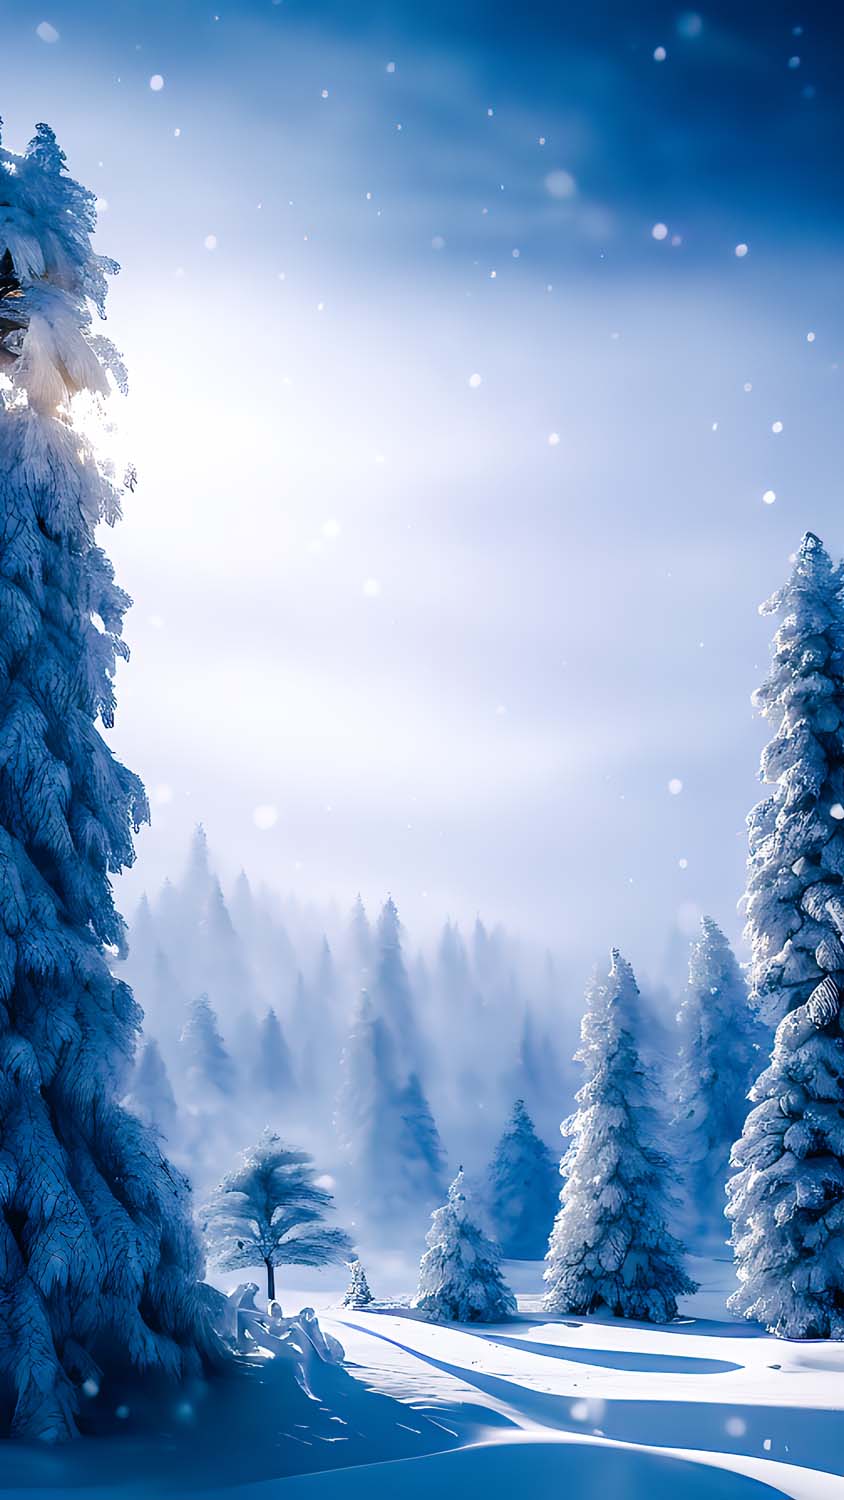 Snow Covered Trees iPhone Wallpaper HD